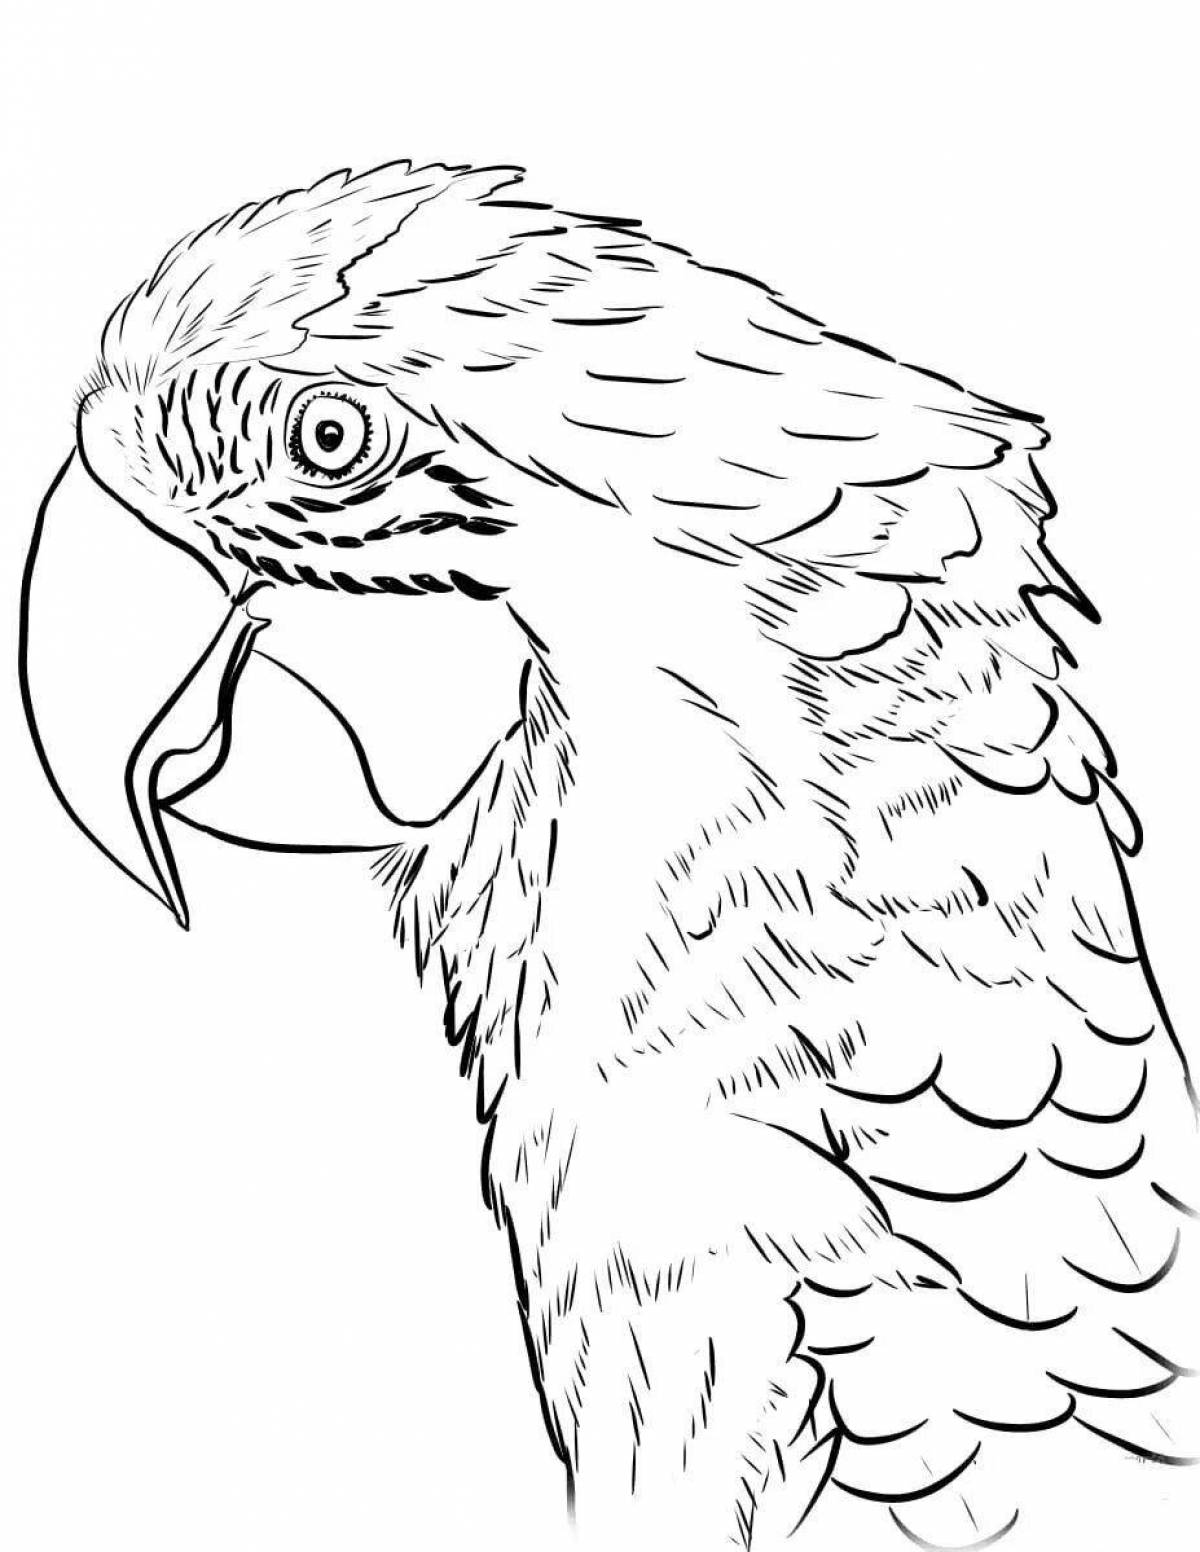 Brilliantly rendered blue macaw coloring page